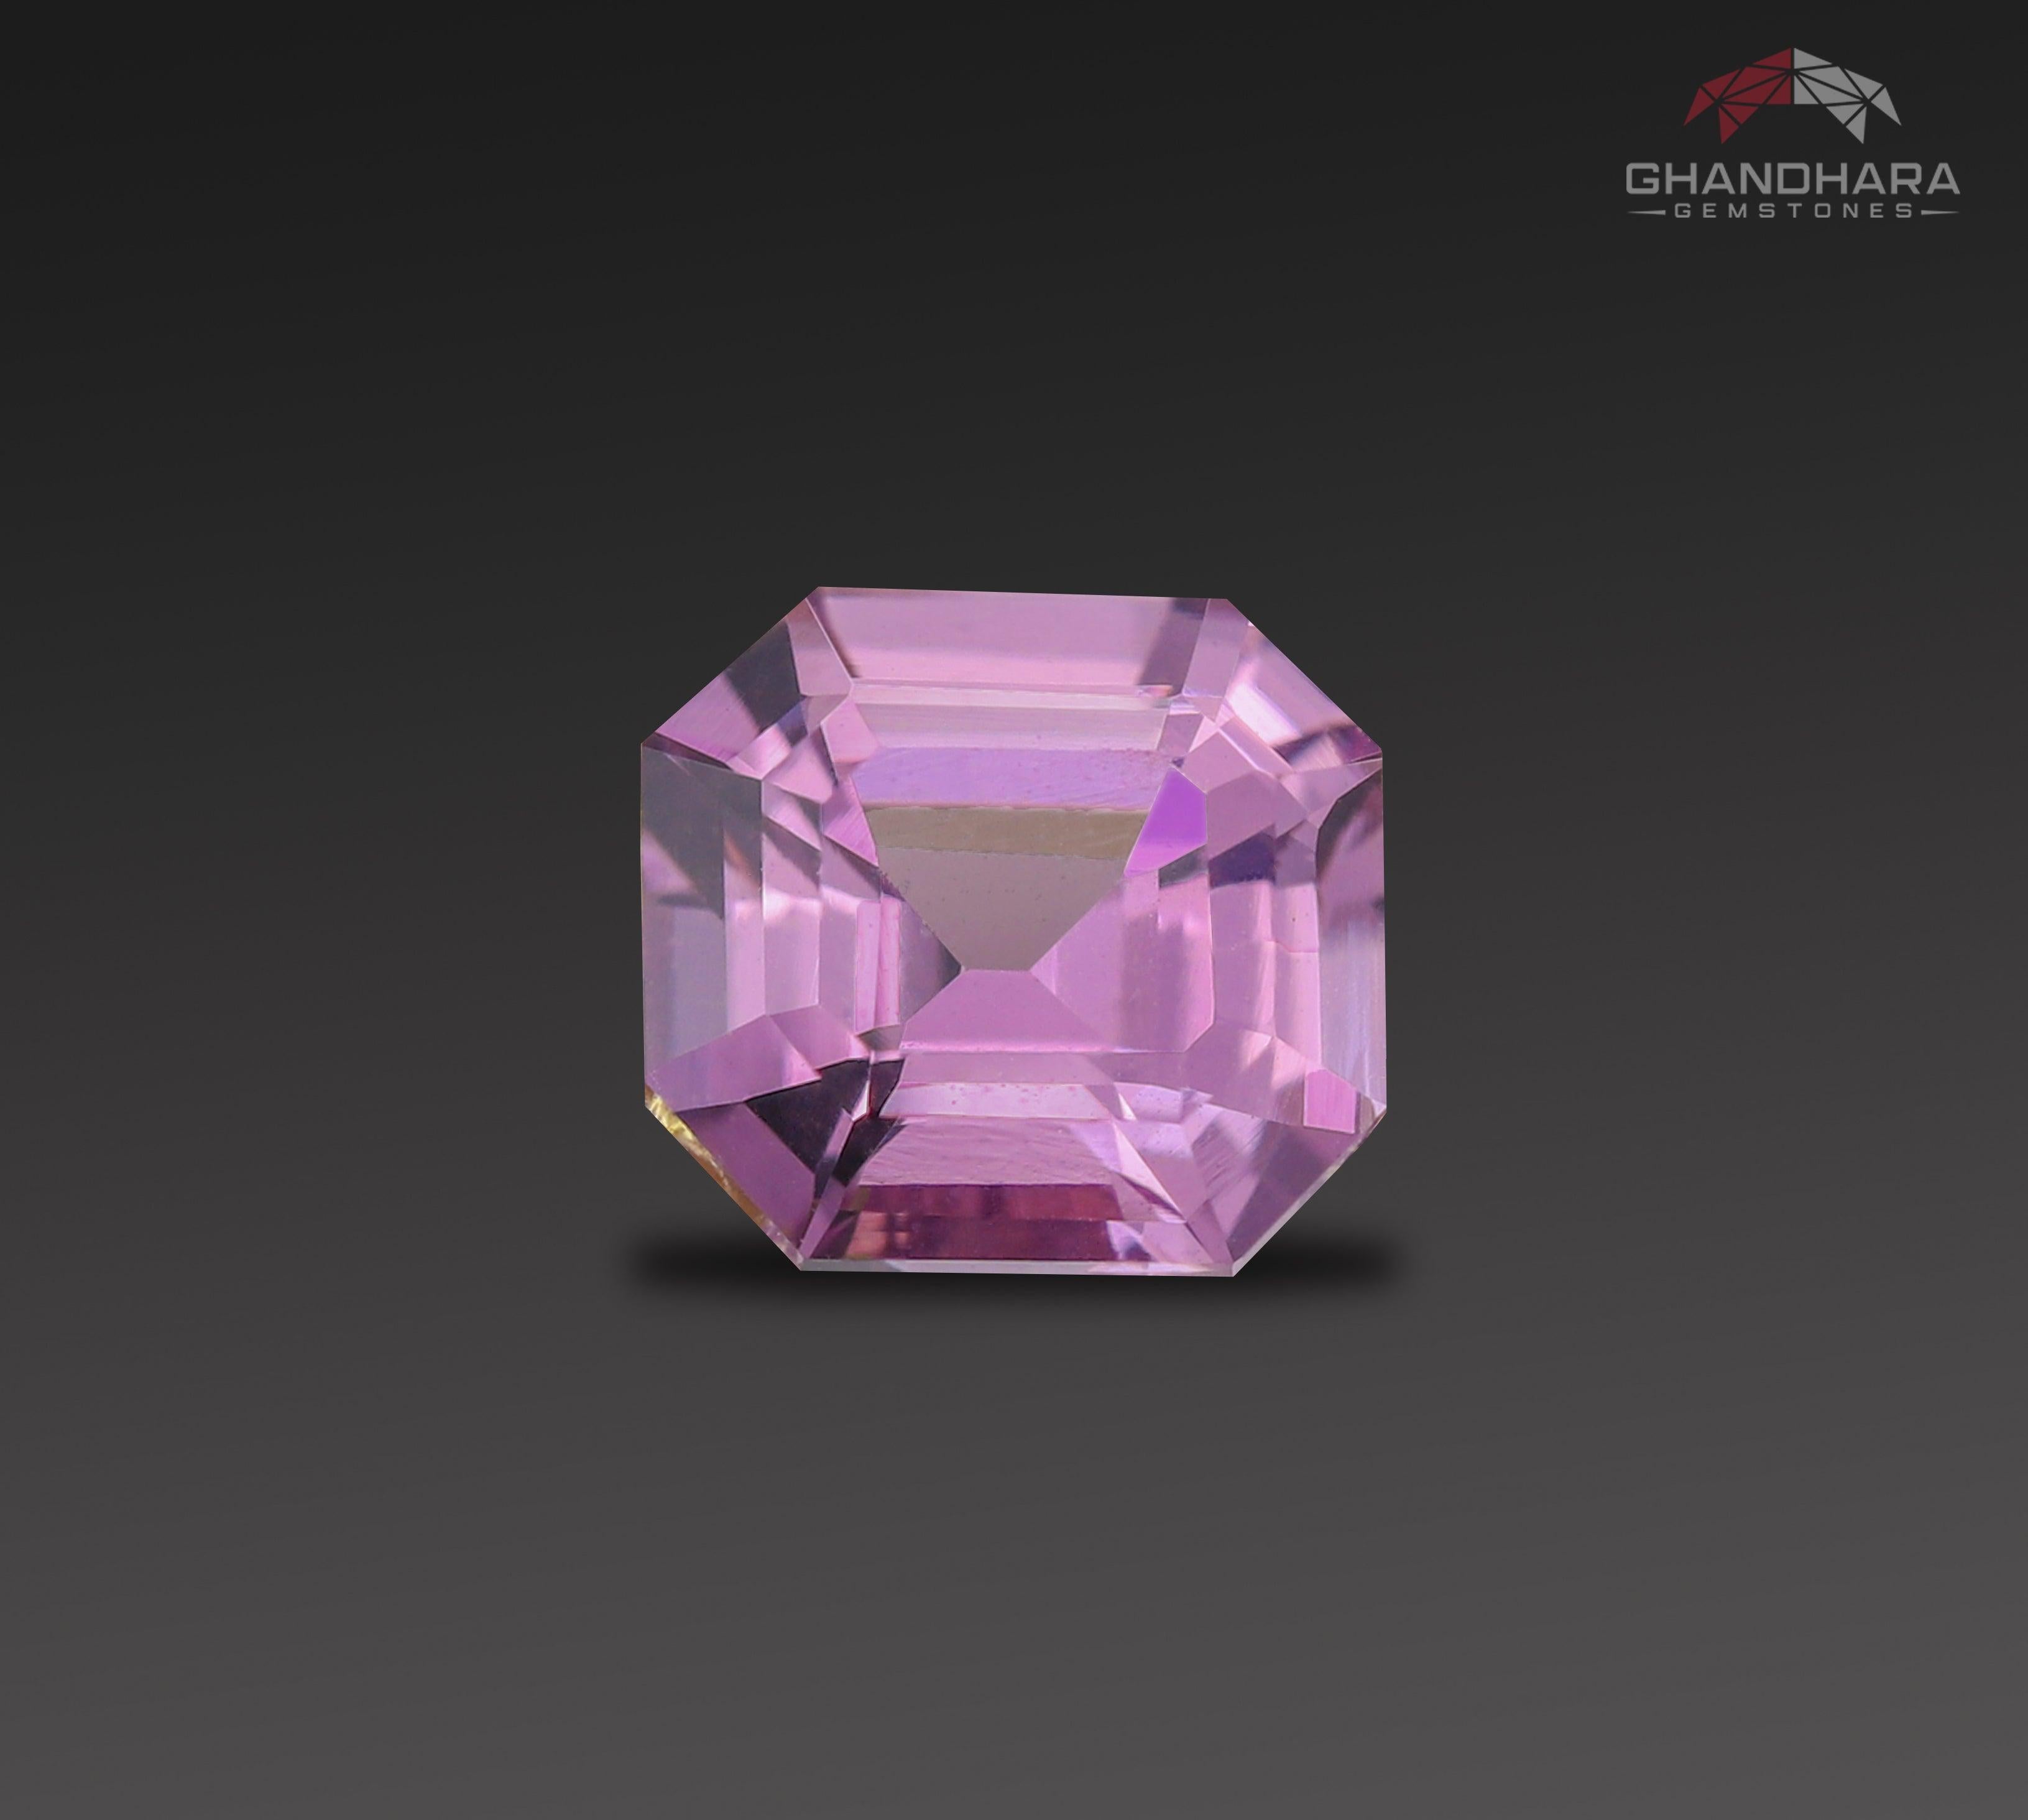 Sweet Pink Natural Spinel Gemstone, available for sale at whole price natural high quality, octagon shape, 0.94 Carats loose spinel From Burma.

Product Information:
GEMSTONE TYPE	Sweet Pink Natural Spinel Gemstone
WEIGHT	0.94 carats
DIMENSIONS	5.9